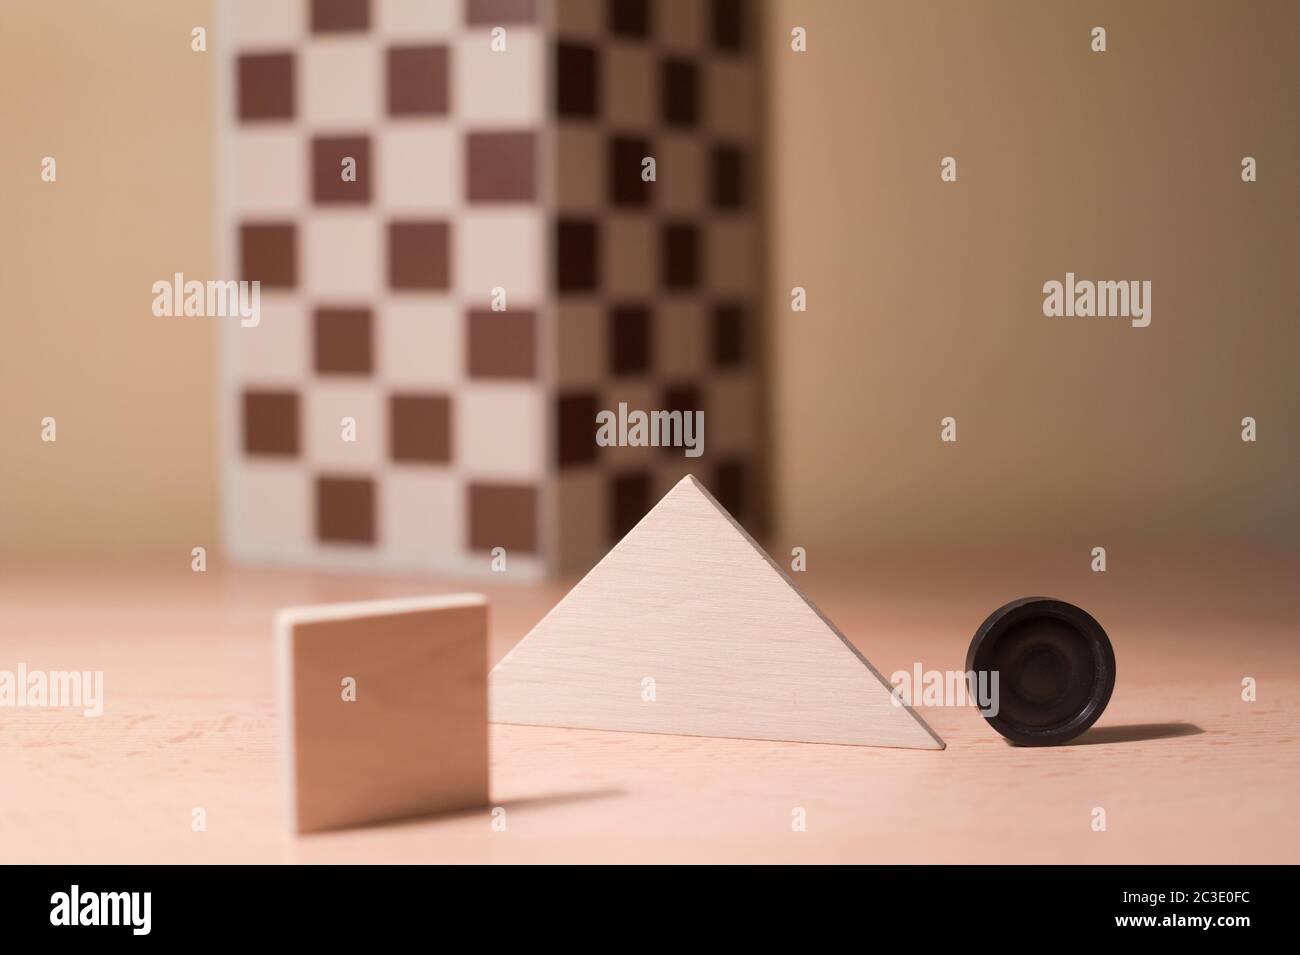 Composition of various objects - square, triangle, chessboard, round - on wooden desk. Shallow depth of field and cream tint. Stock Photo